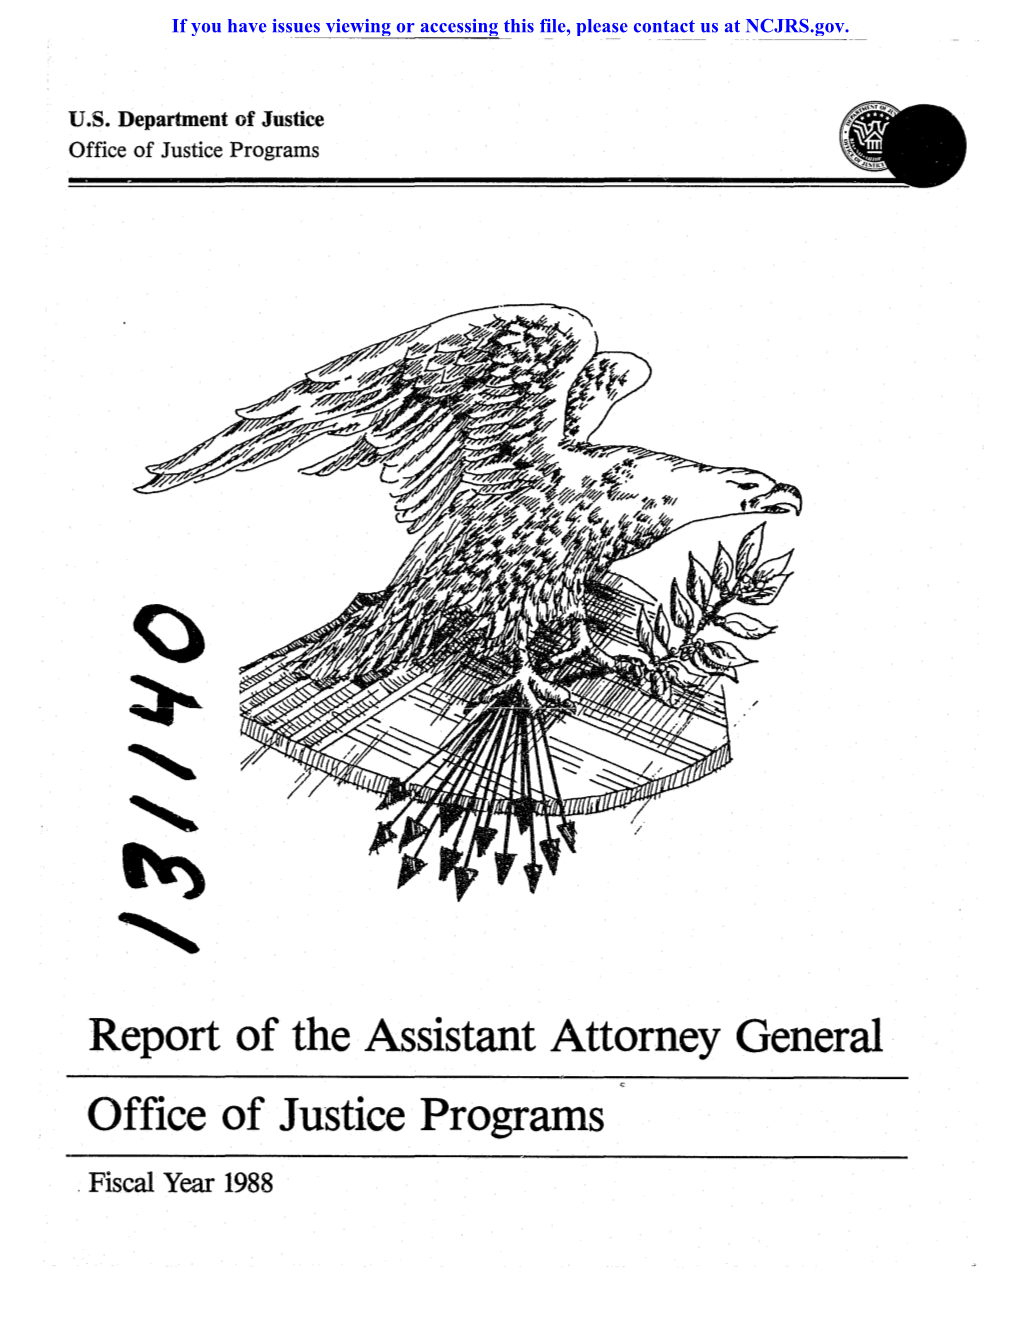 Report of the Assistant Attorney General Office of Justice Programs